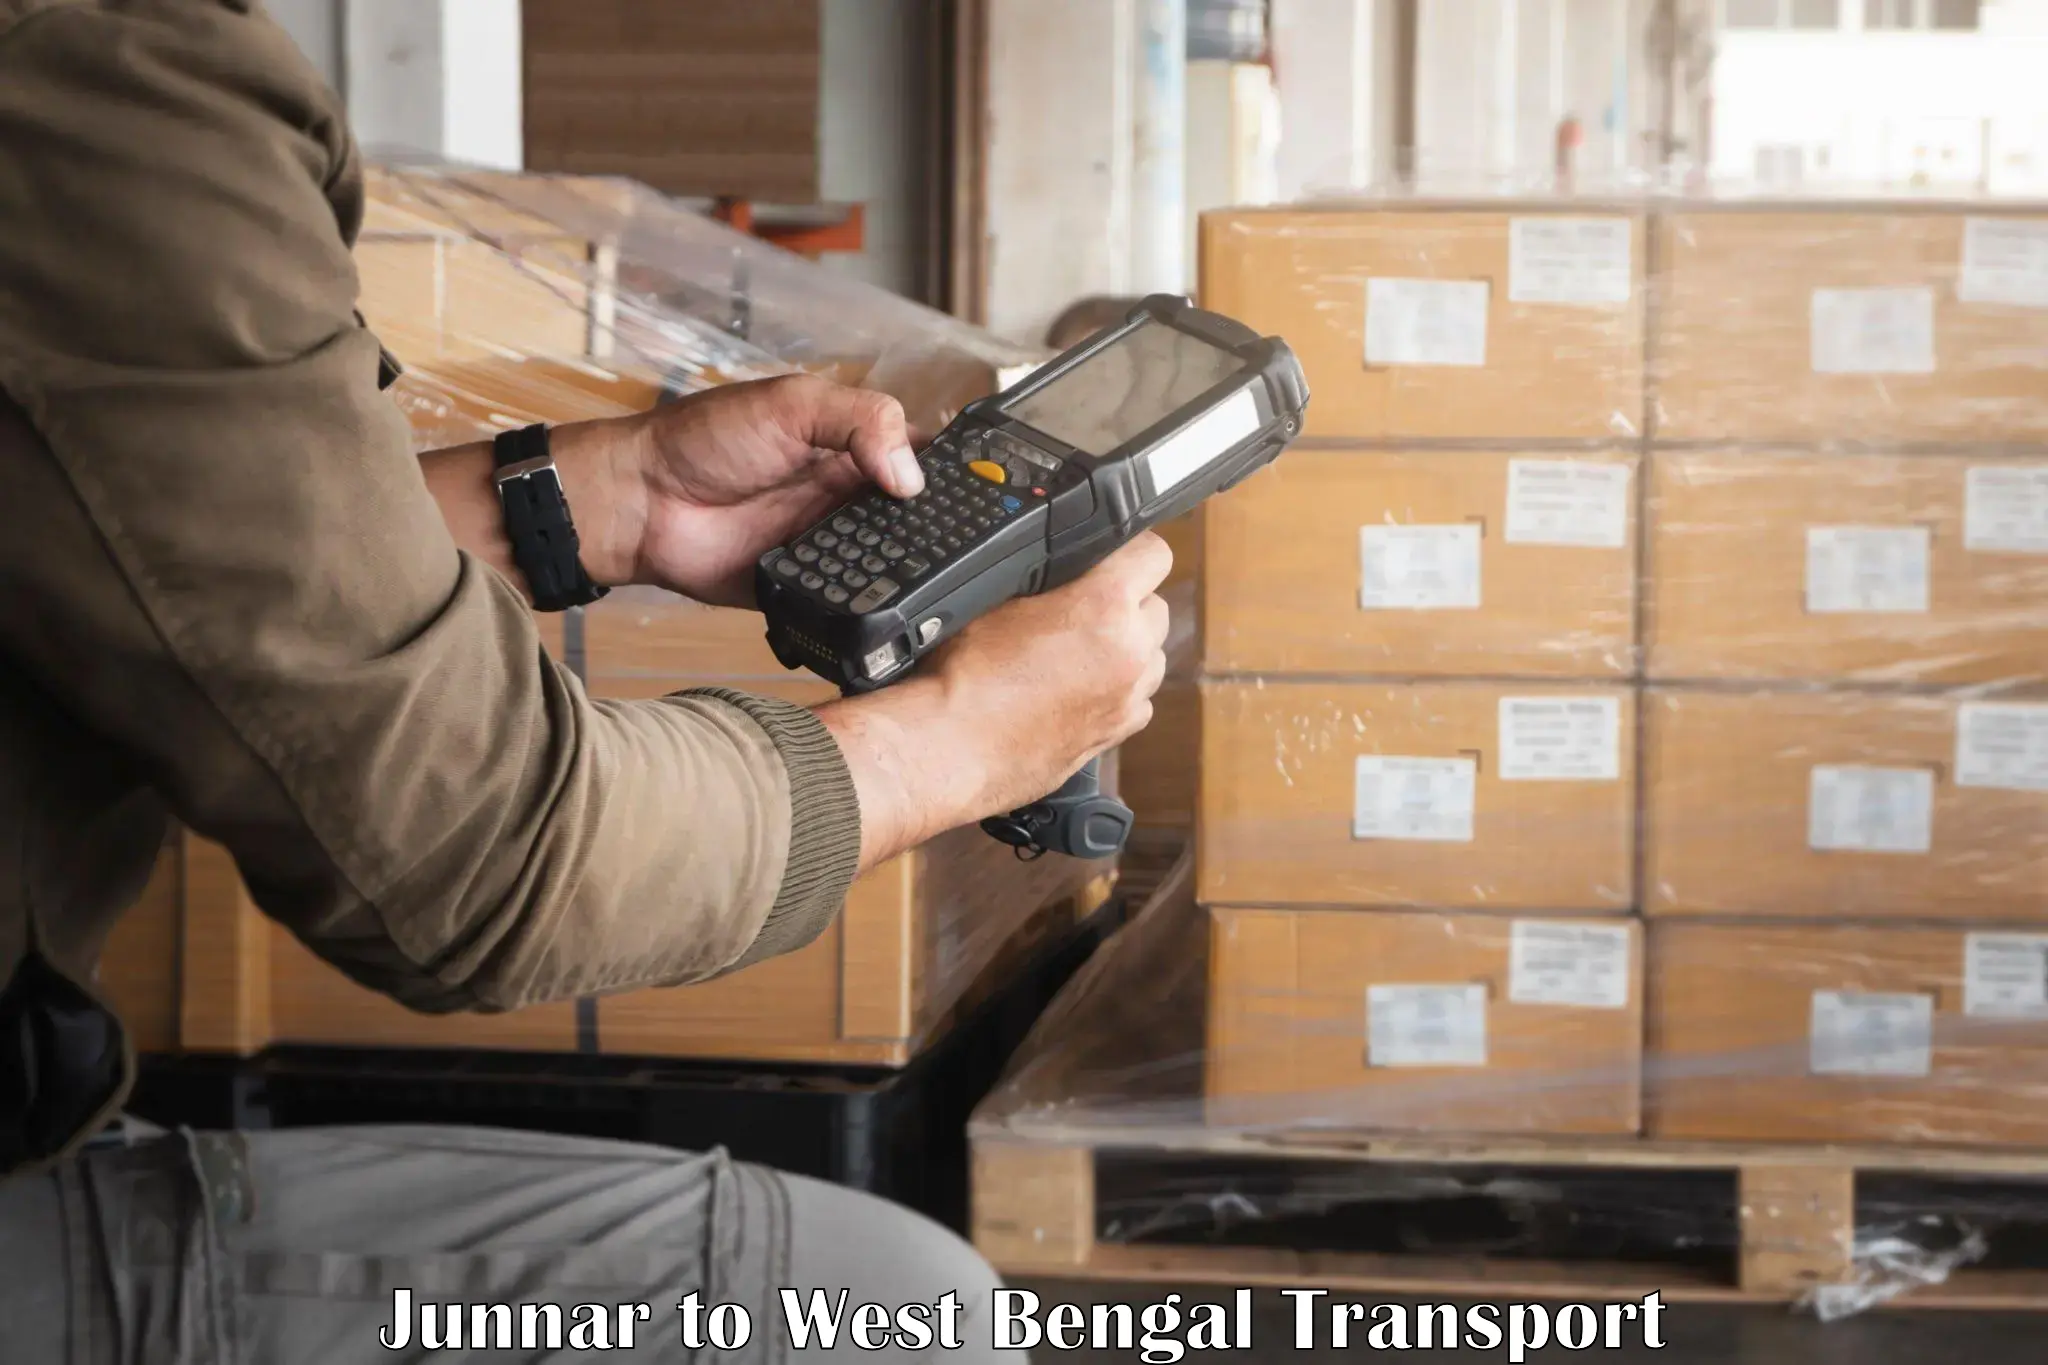 Nationwide transport services Junnar to West Bengal